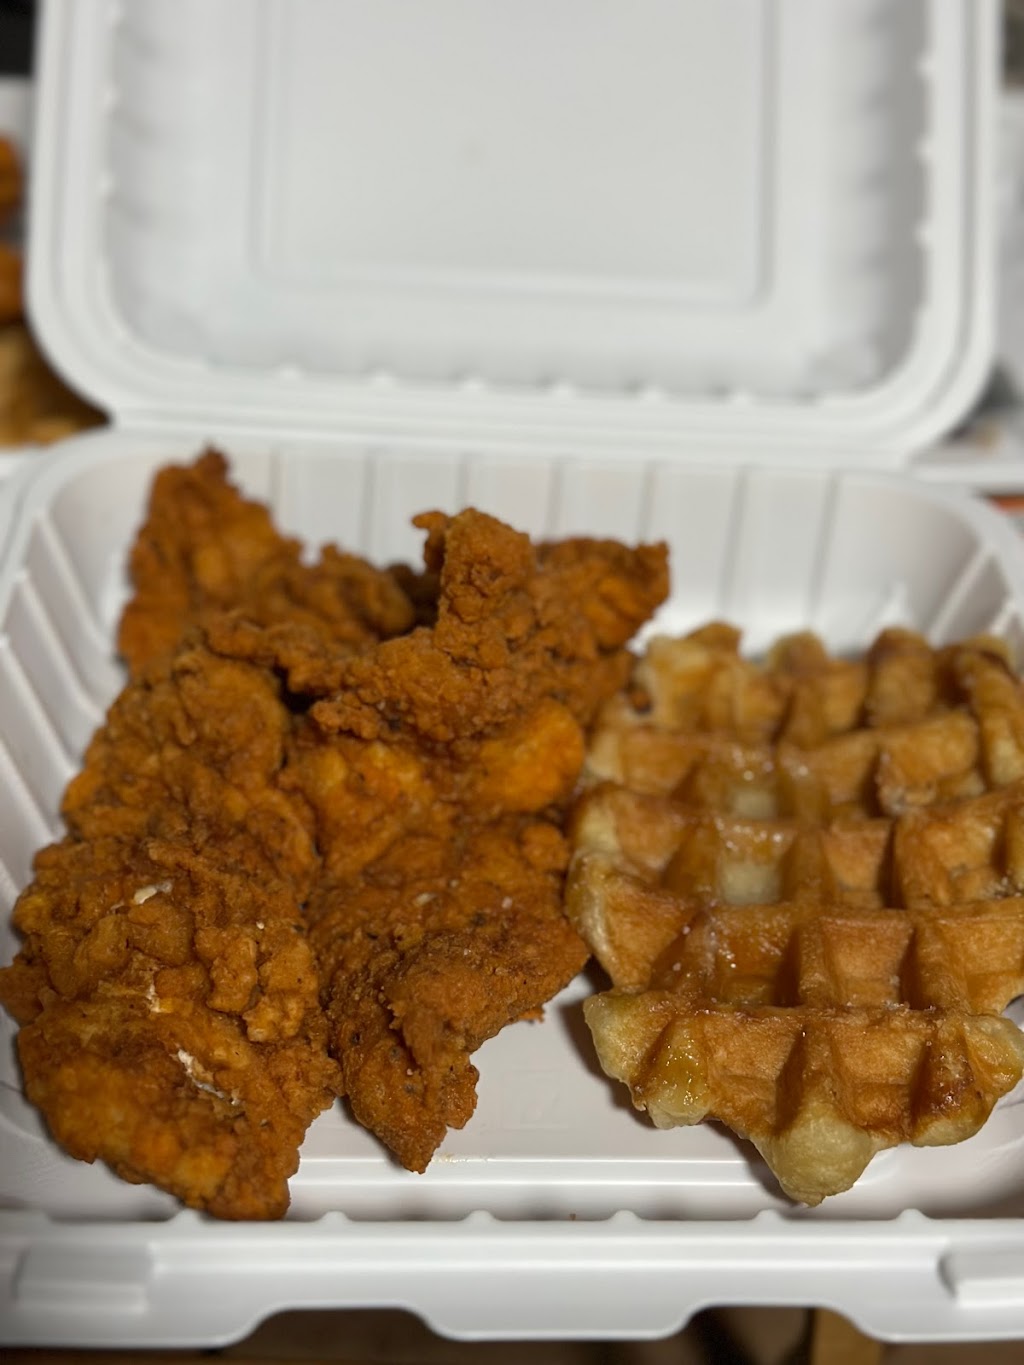 Roosters Chicken And Waffles | 78 Franklin St, Westfield, MA 01085 | Phone: (413) 262-3735